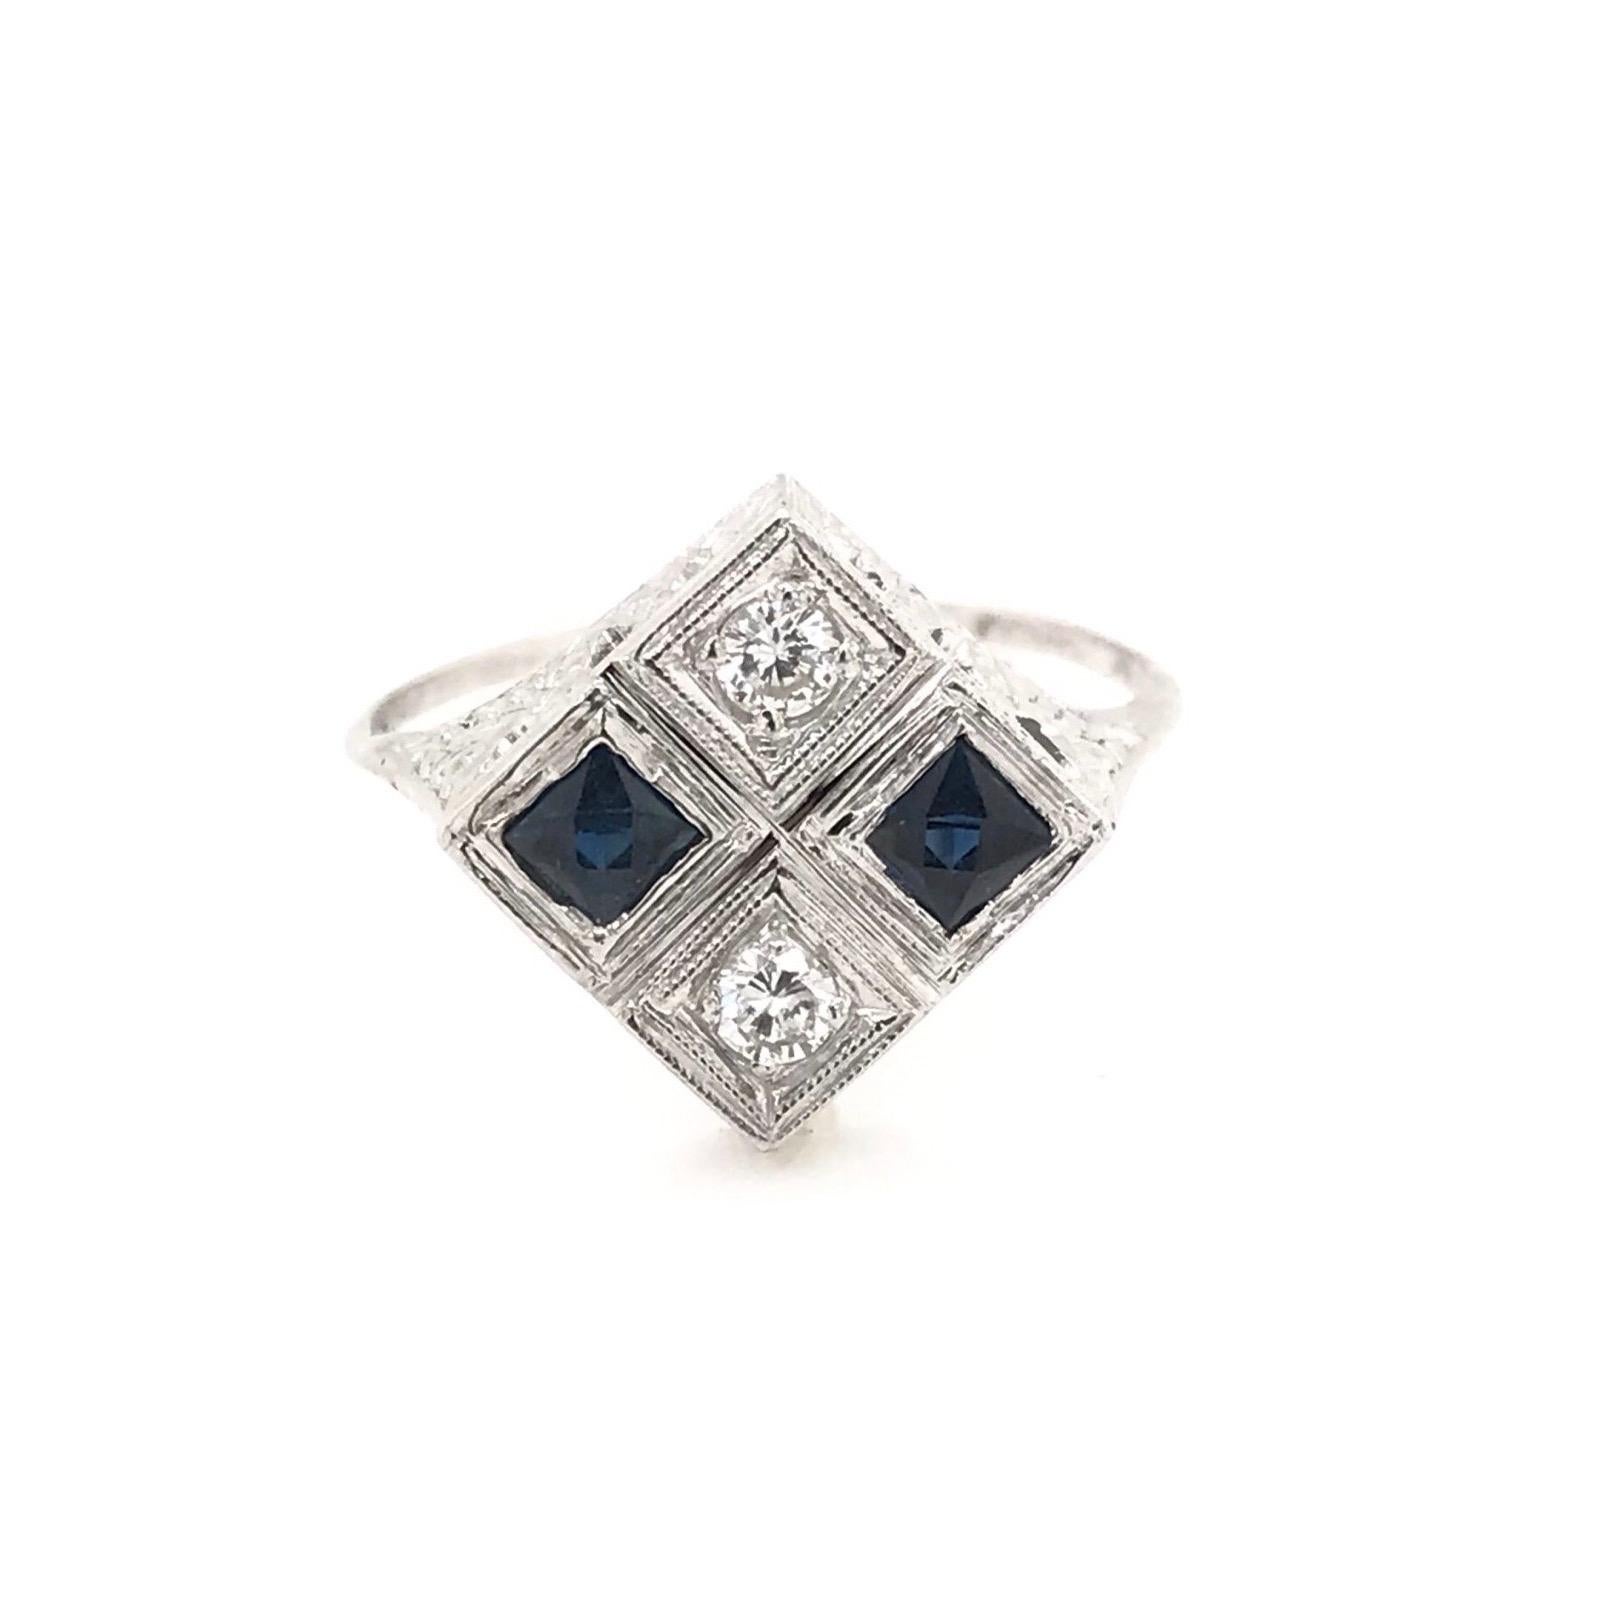 This antique piece was handcrafted during the Art Deco design period ( 1920-1940 ). The 18k white gold setting features two sparkling diamond accents arranged north to south as well as two custom cut deep blue sapphire accents arranged east to west.